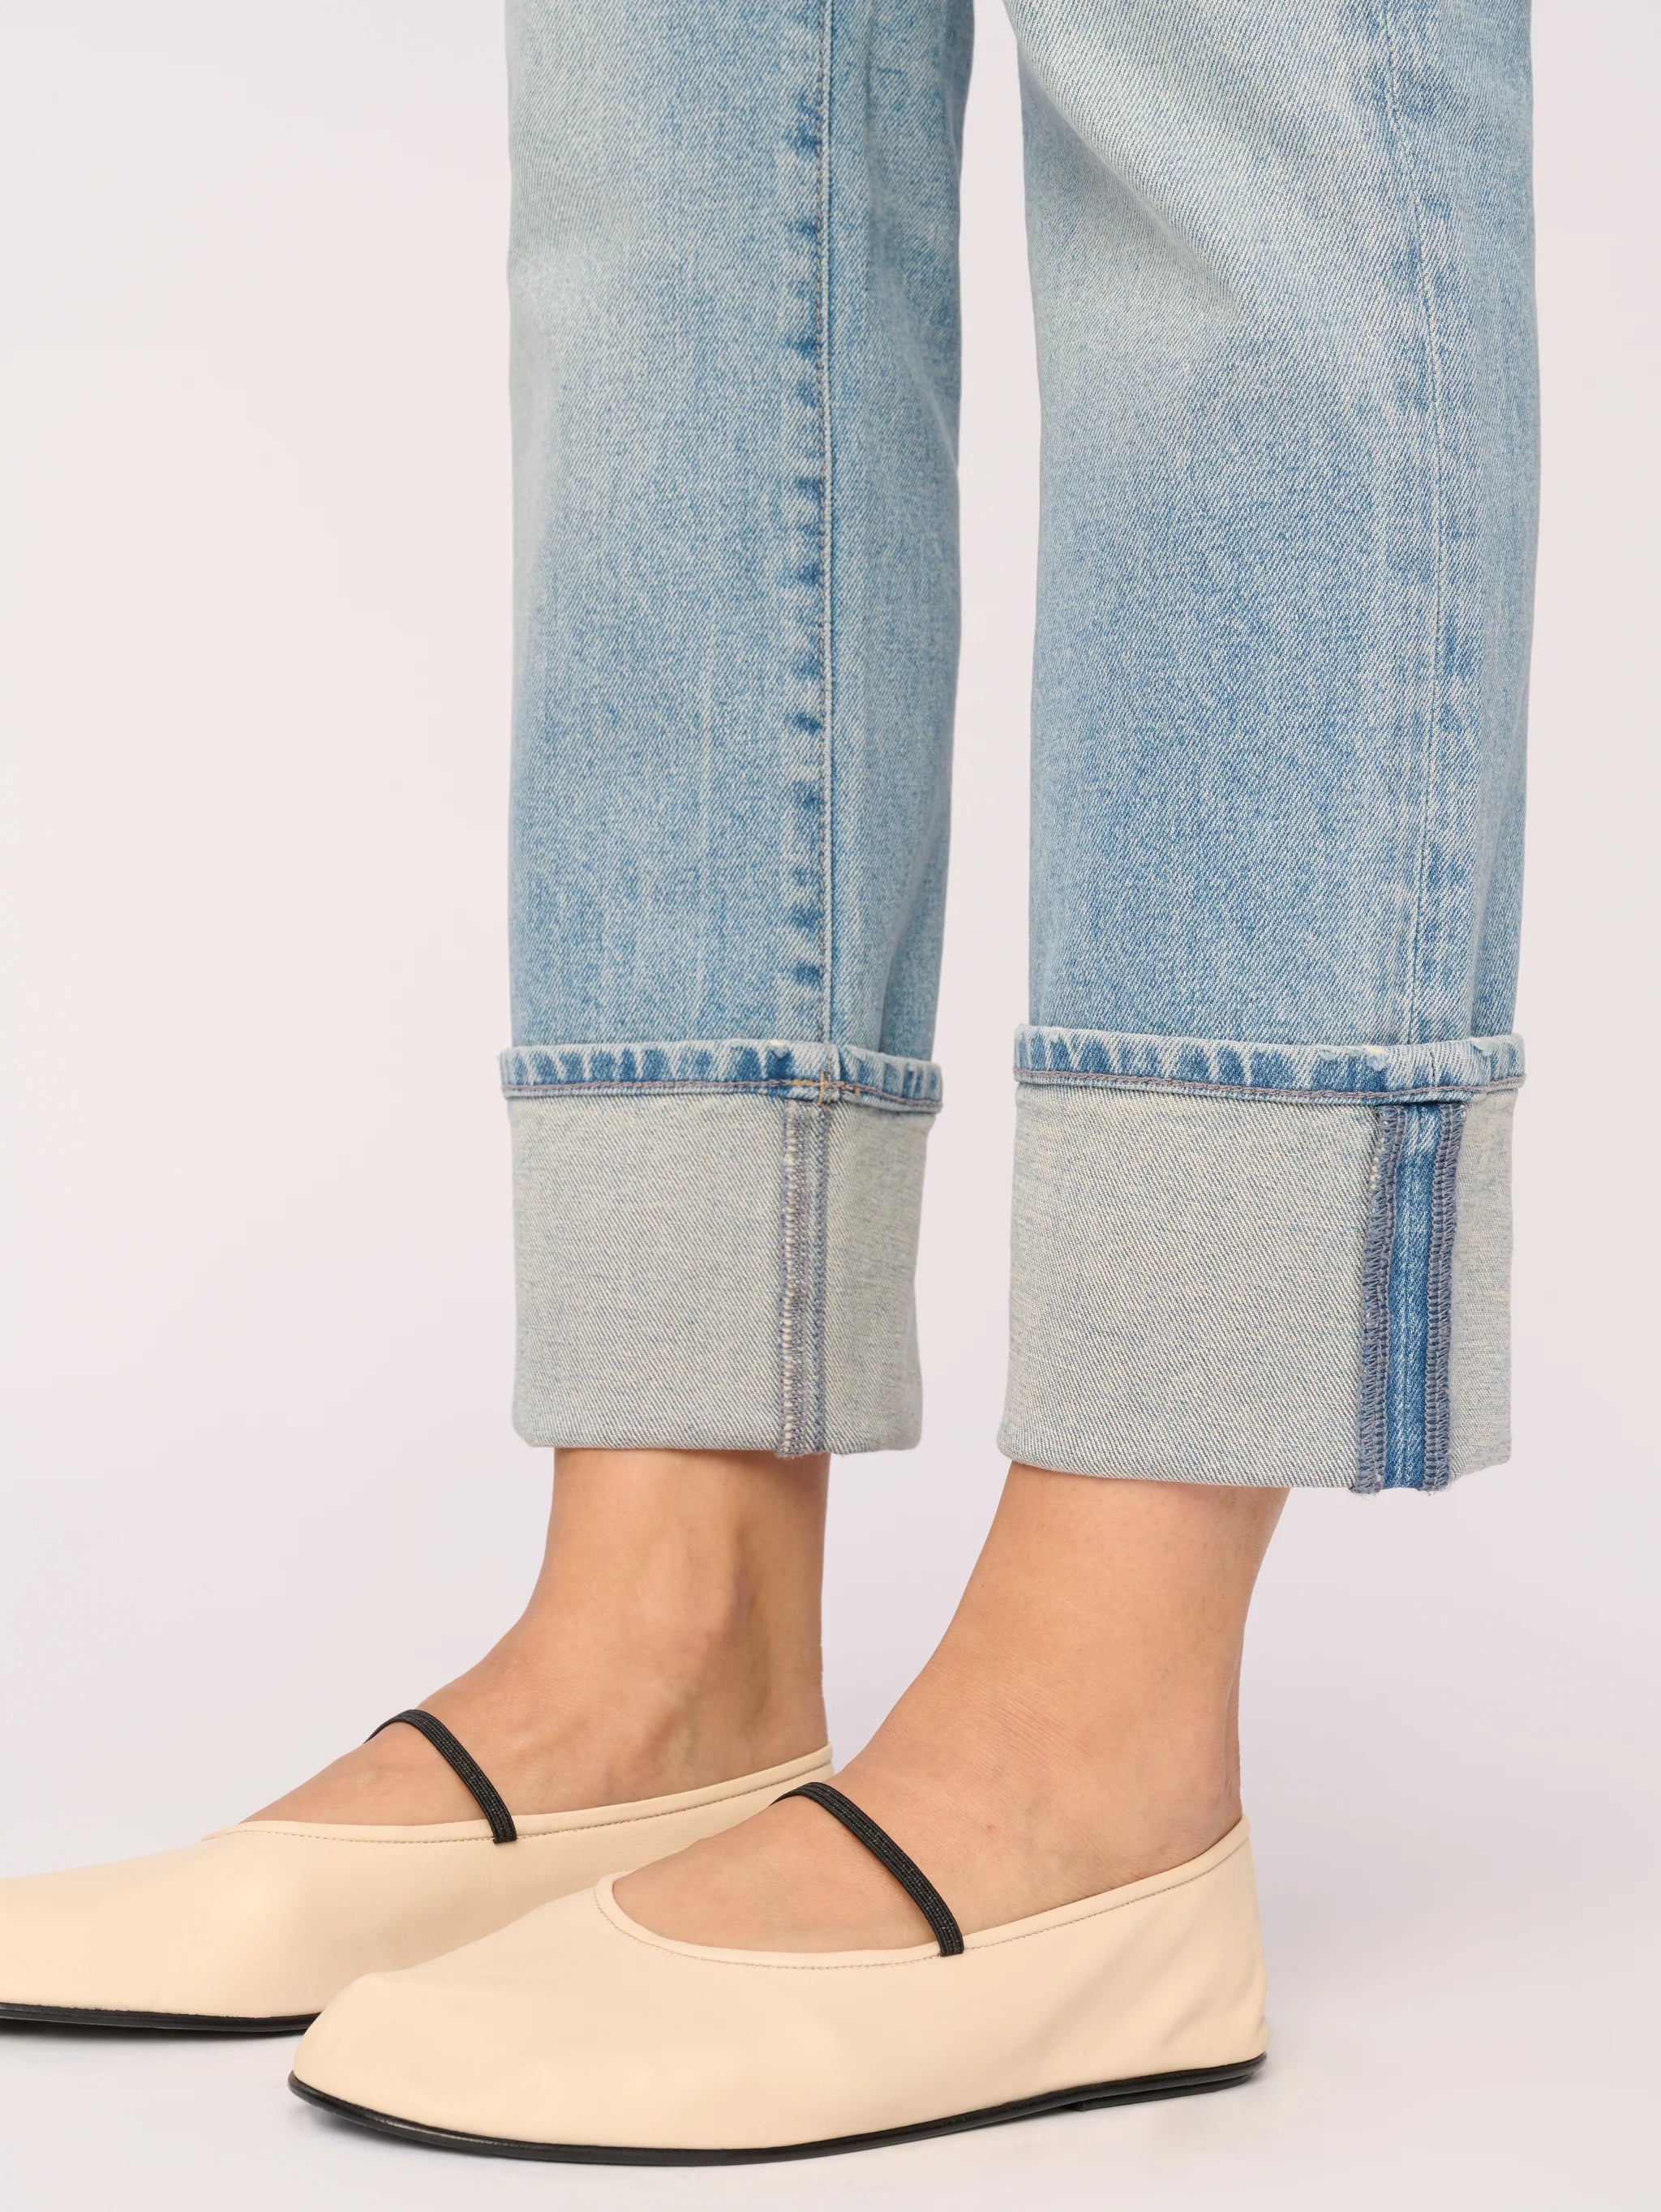 DL1961 Patti Straight High Rise Vintage Ankle Jeans Fiji Cuffed